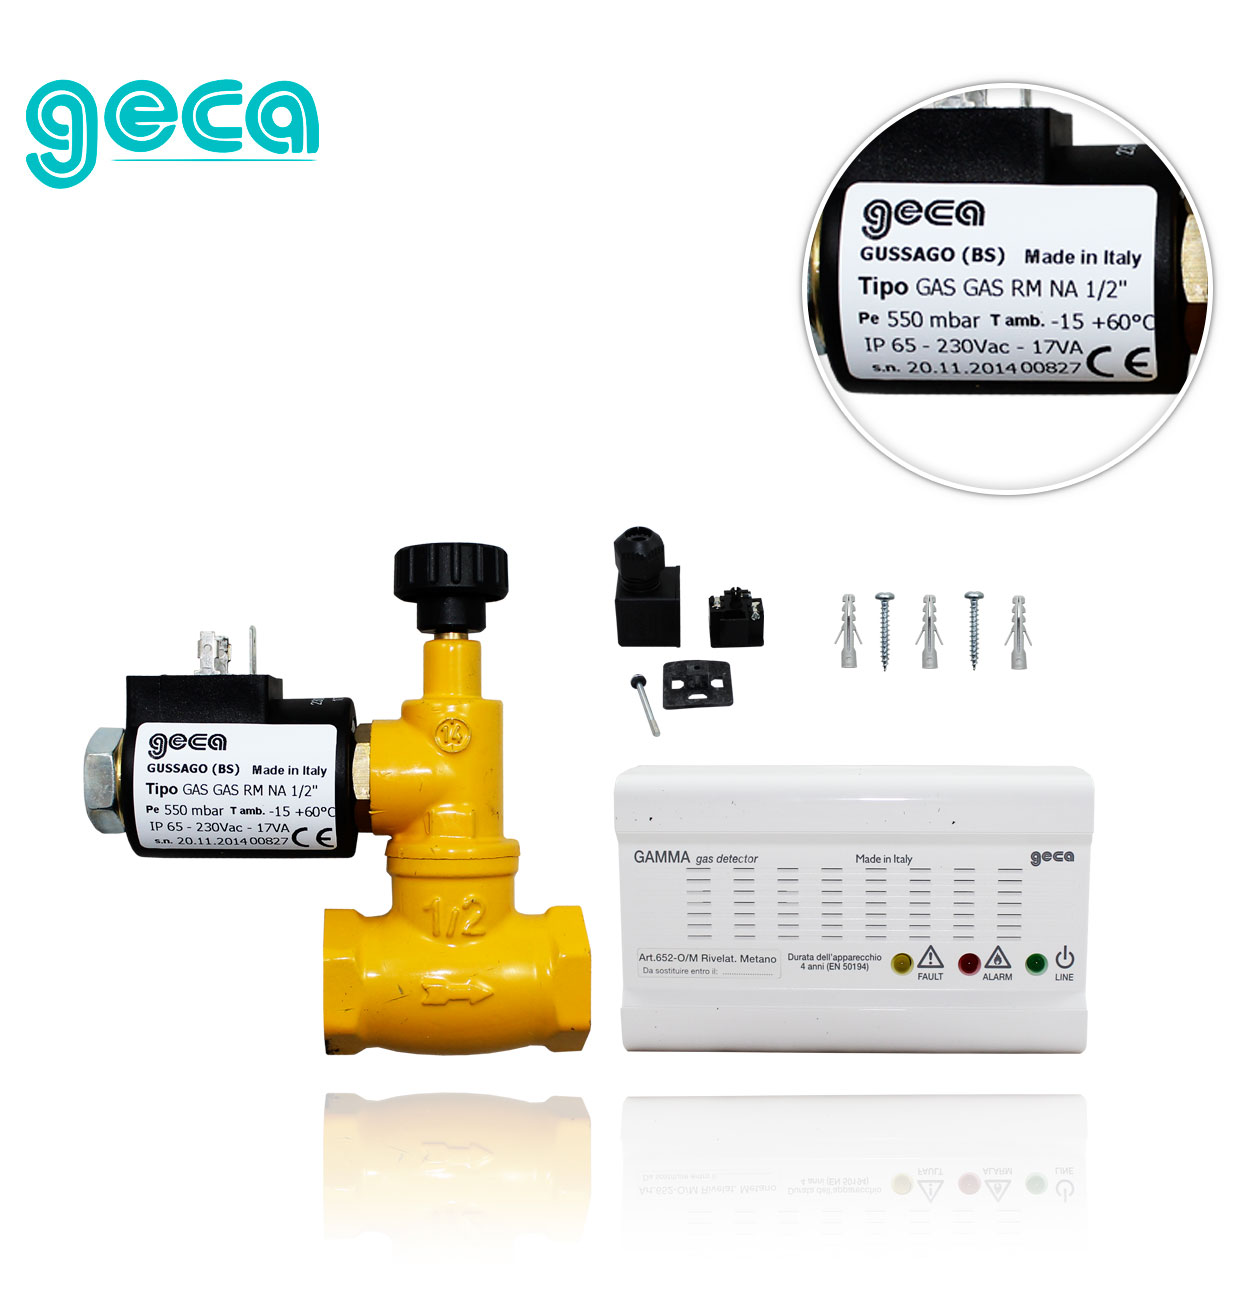 652 GECA SOLENOID VALVE AND CONTROL BOX SAFETY KIT